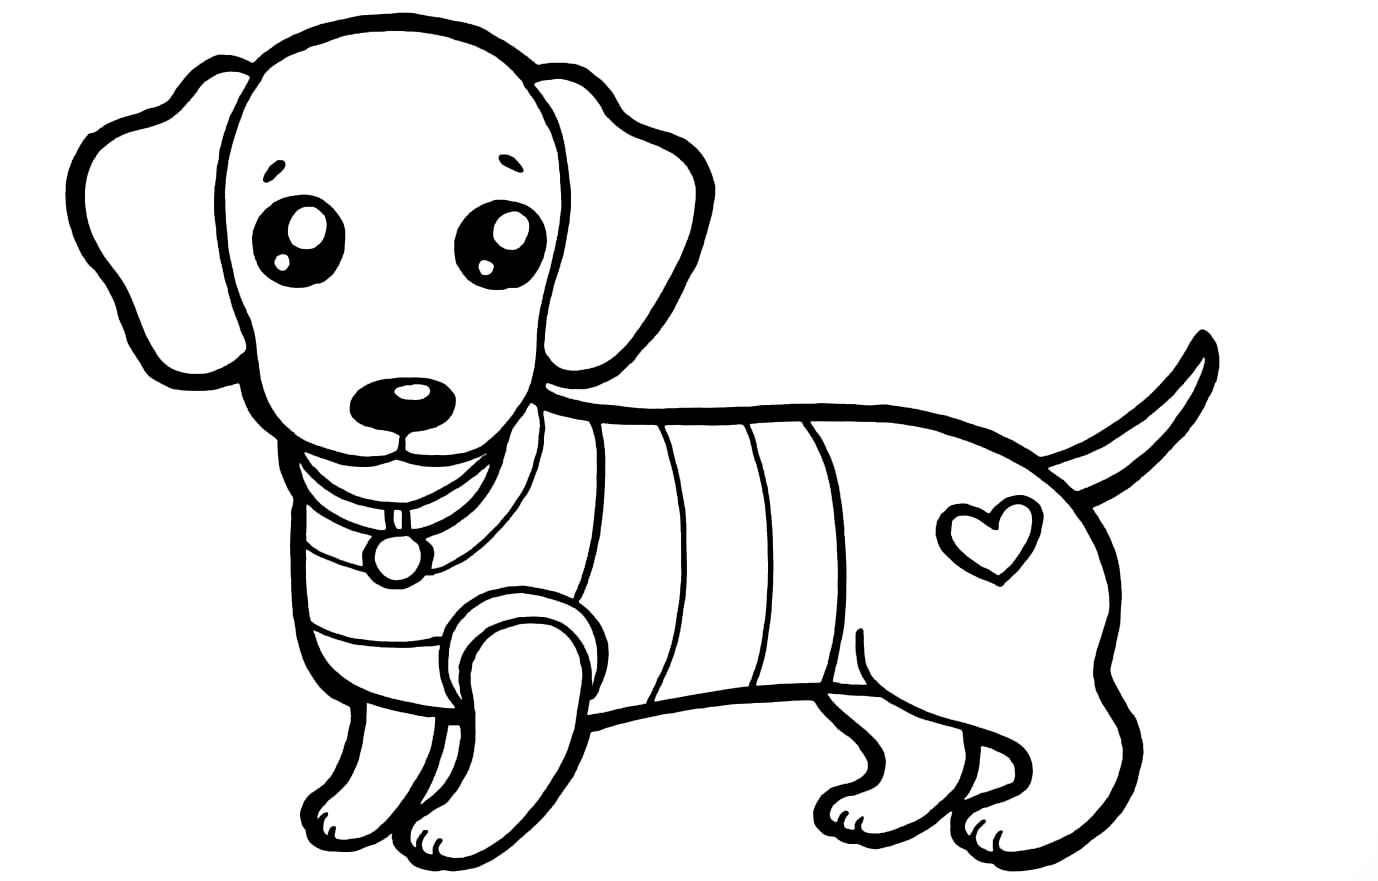 Coloring page Animals for children 5-6 years old Doggie